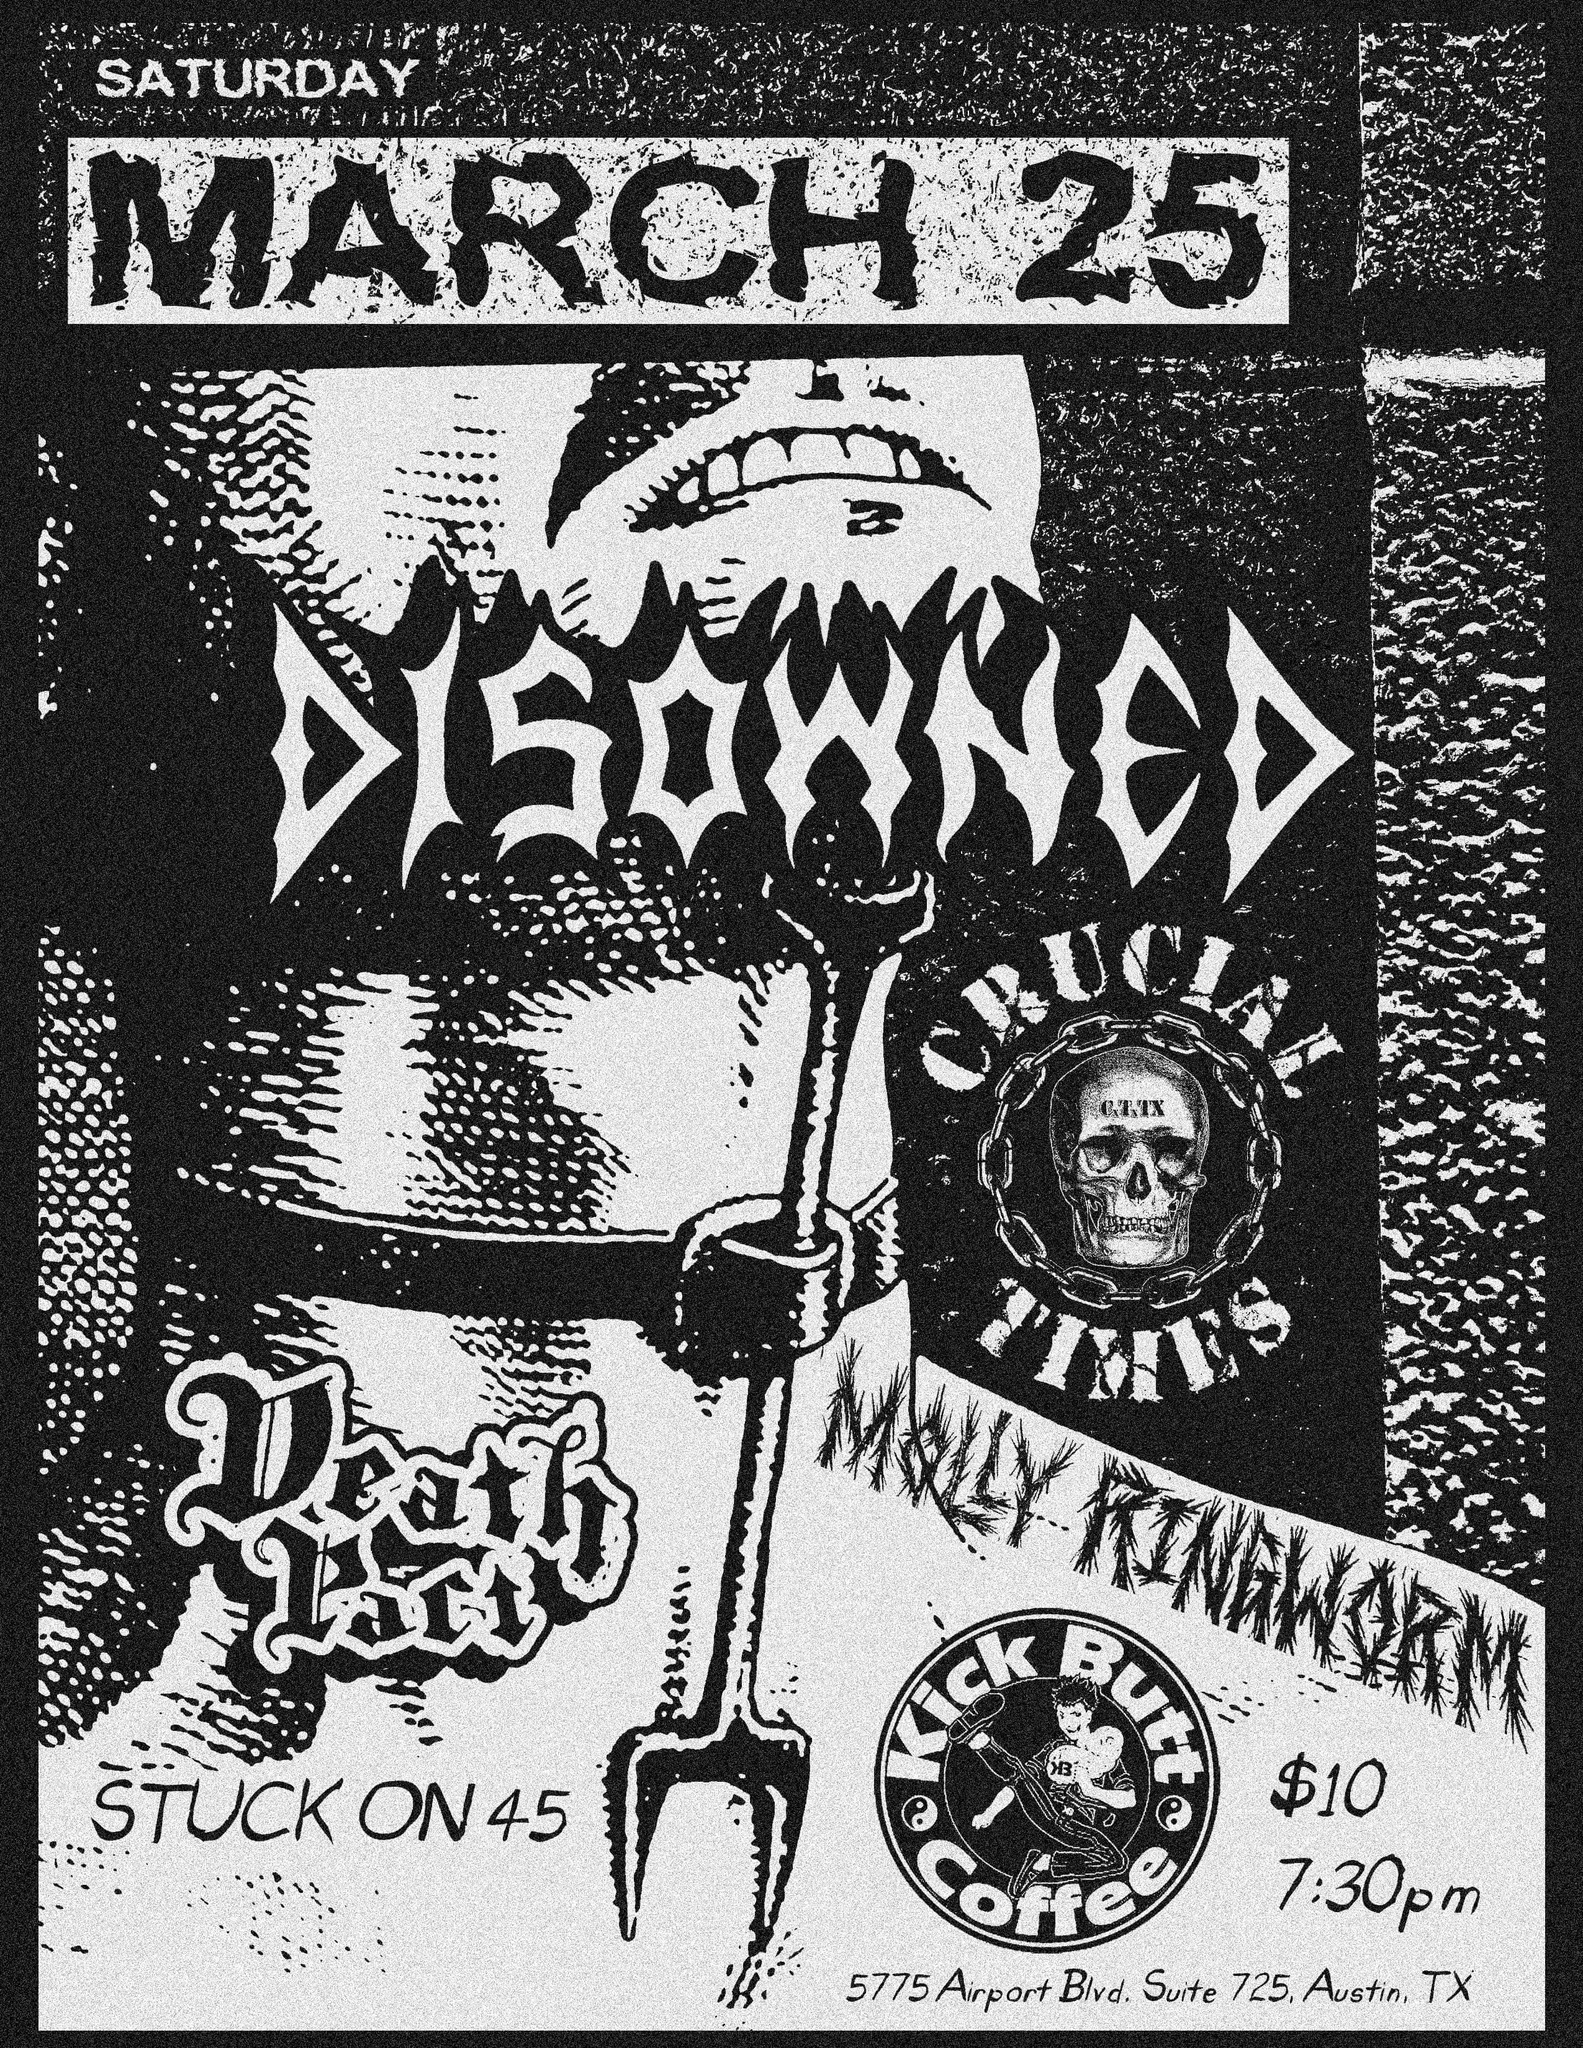 Disowned, Death Pact, Crucial Times, Molly Ringworm, Stuck on 45